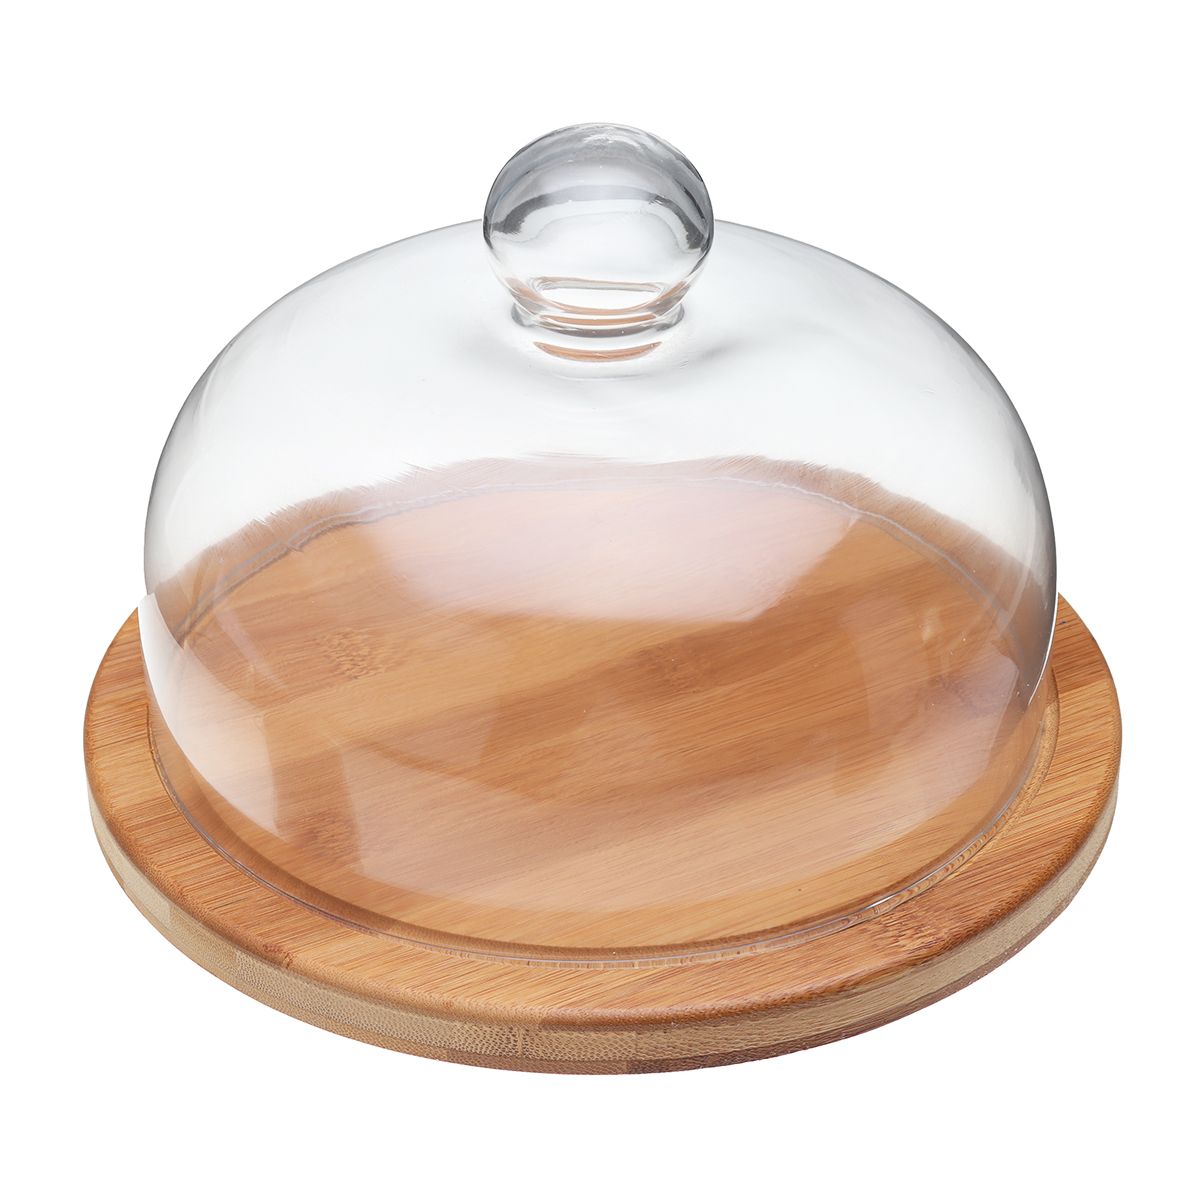 21cm-Glass-Cake-Dessert-Dome-Cover-With-Rotating-Bamboo-Base-Kitchen-Storage-Container-1434670